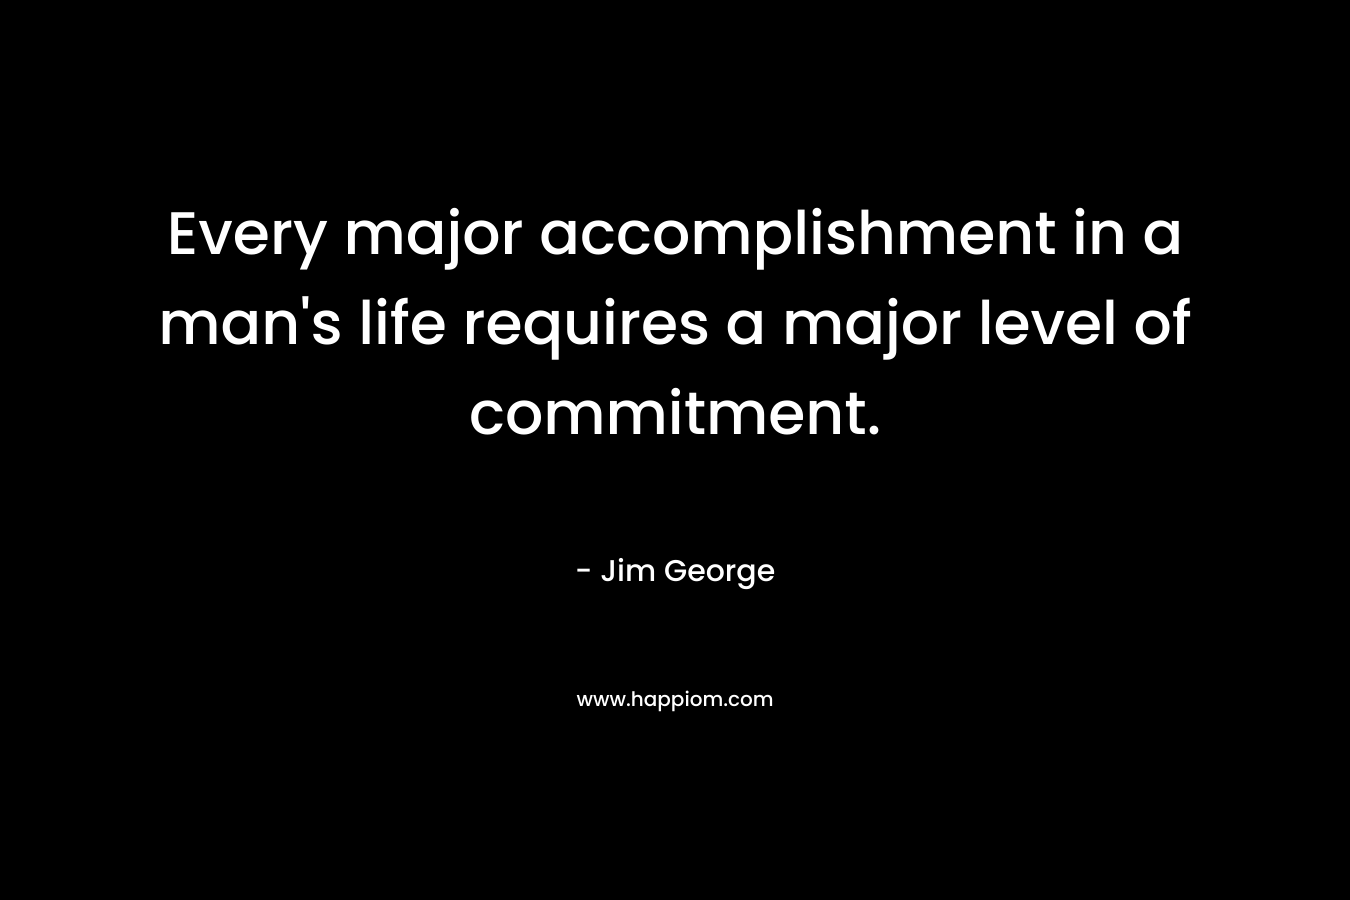 Every major accomplishment in a man's life requires a major level of commitment.